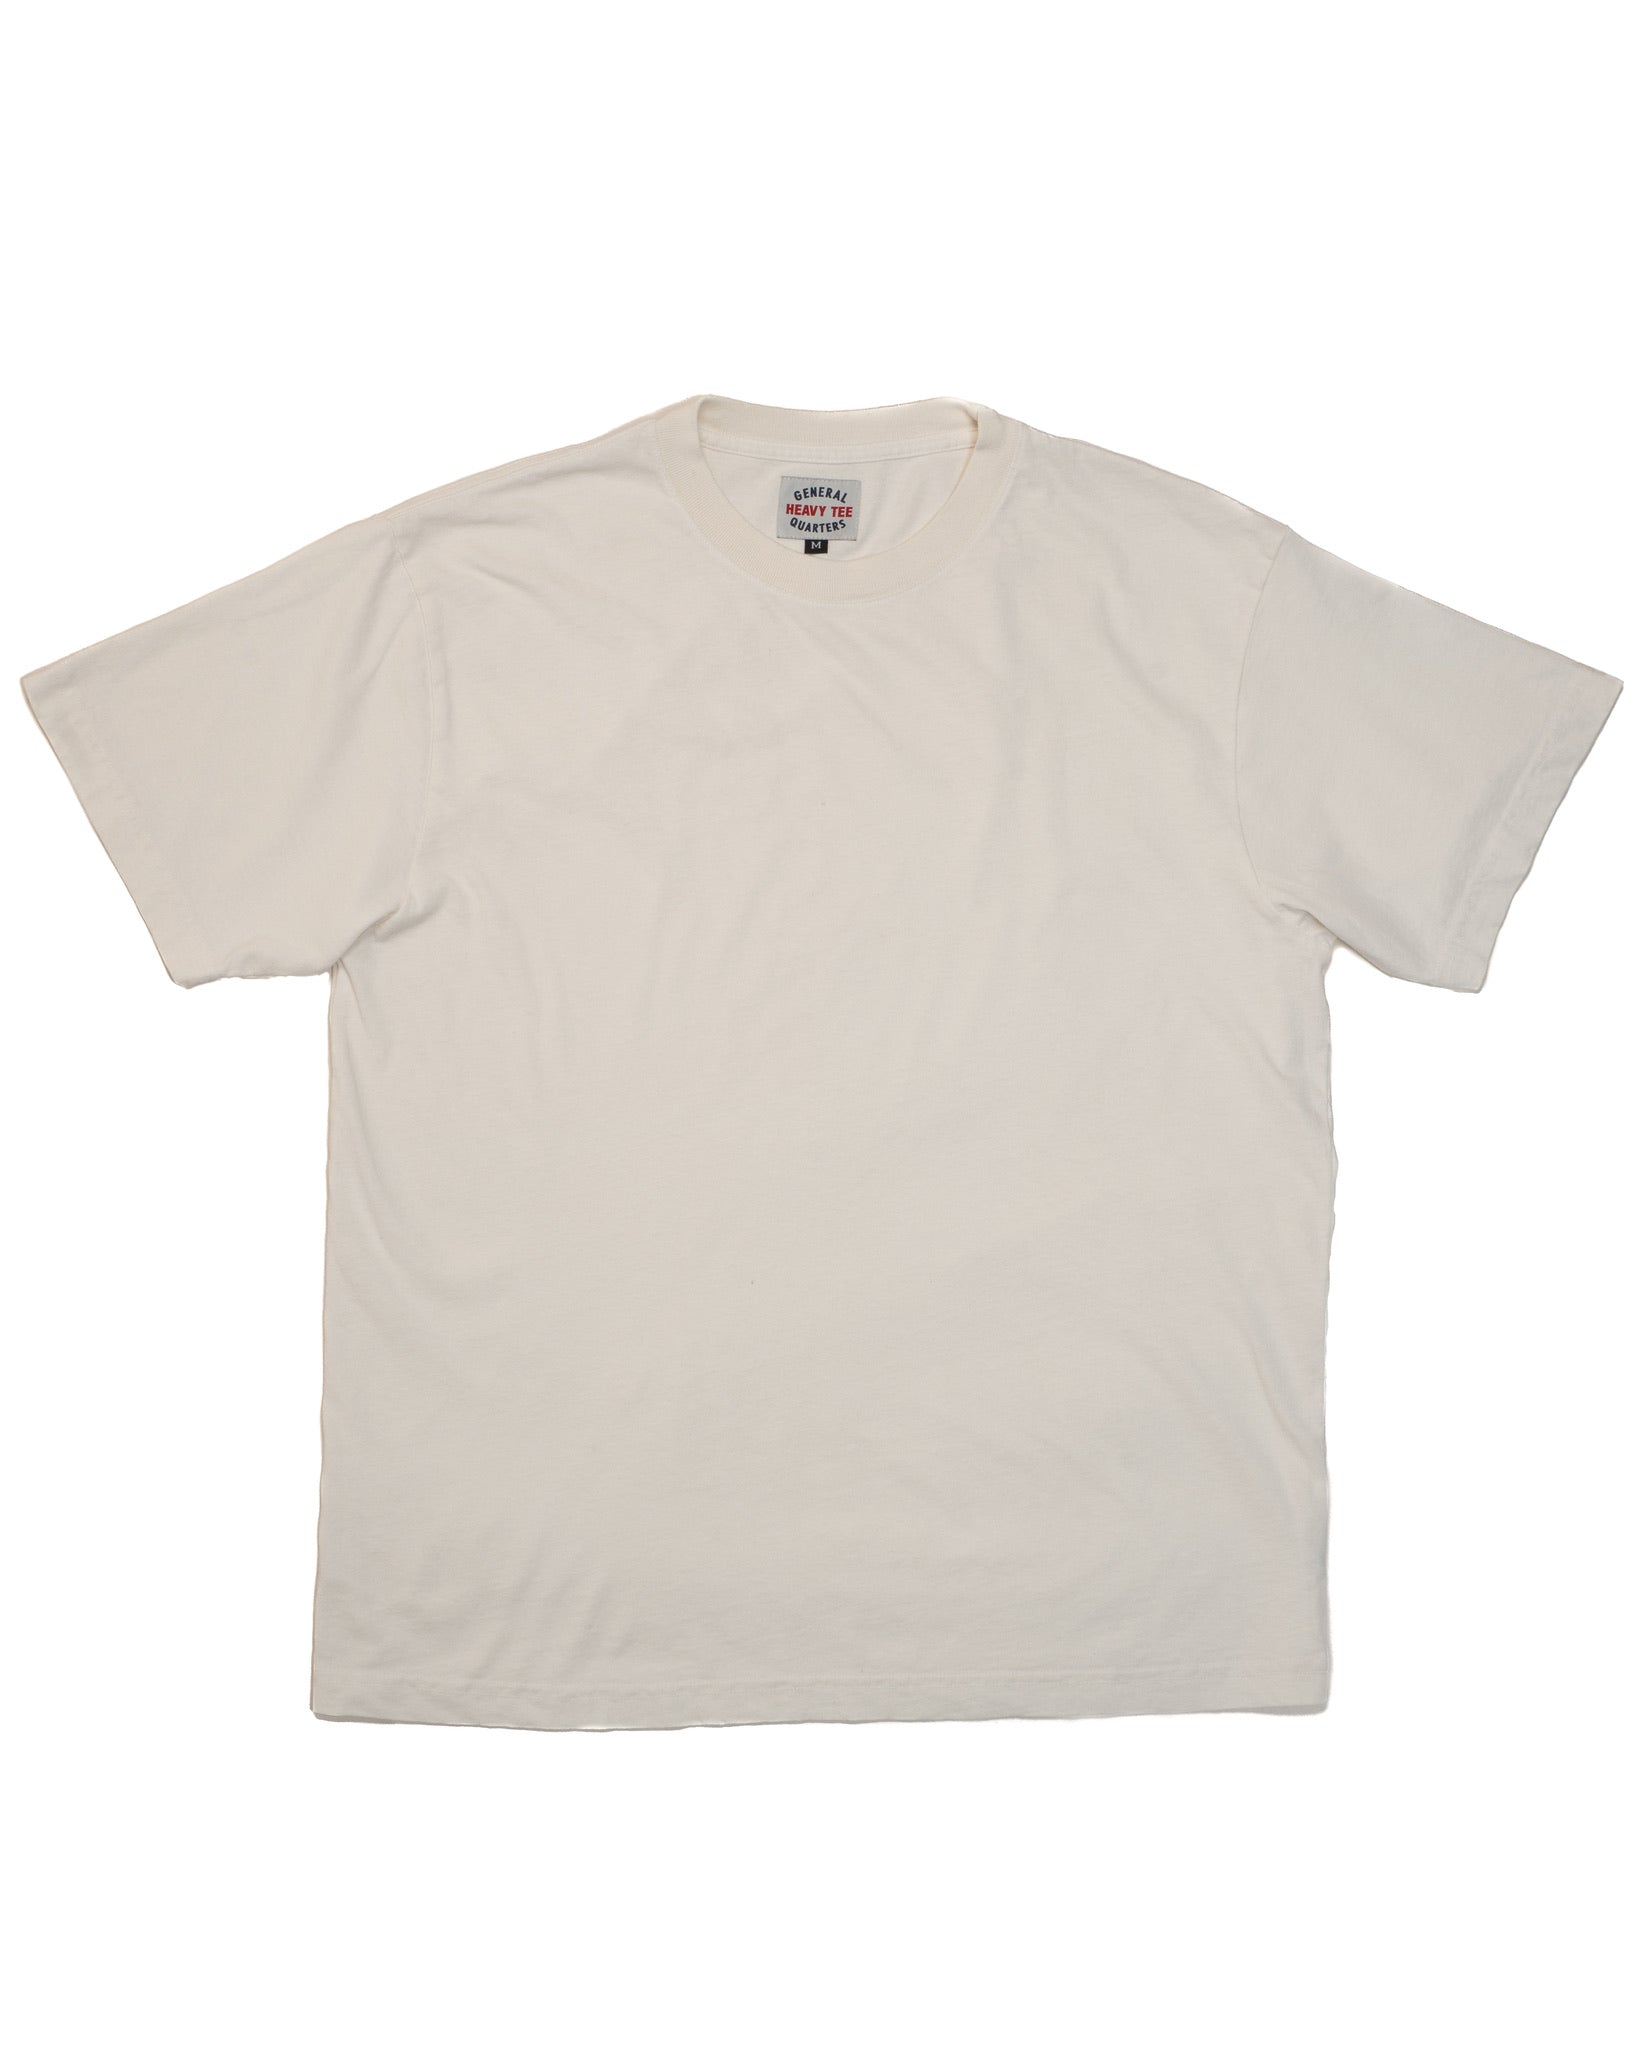 Heavy T-Shirt in Vintage White